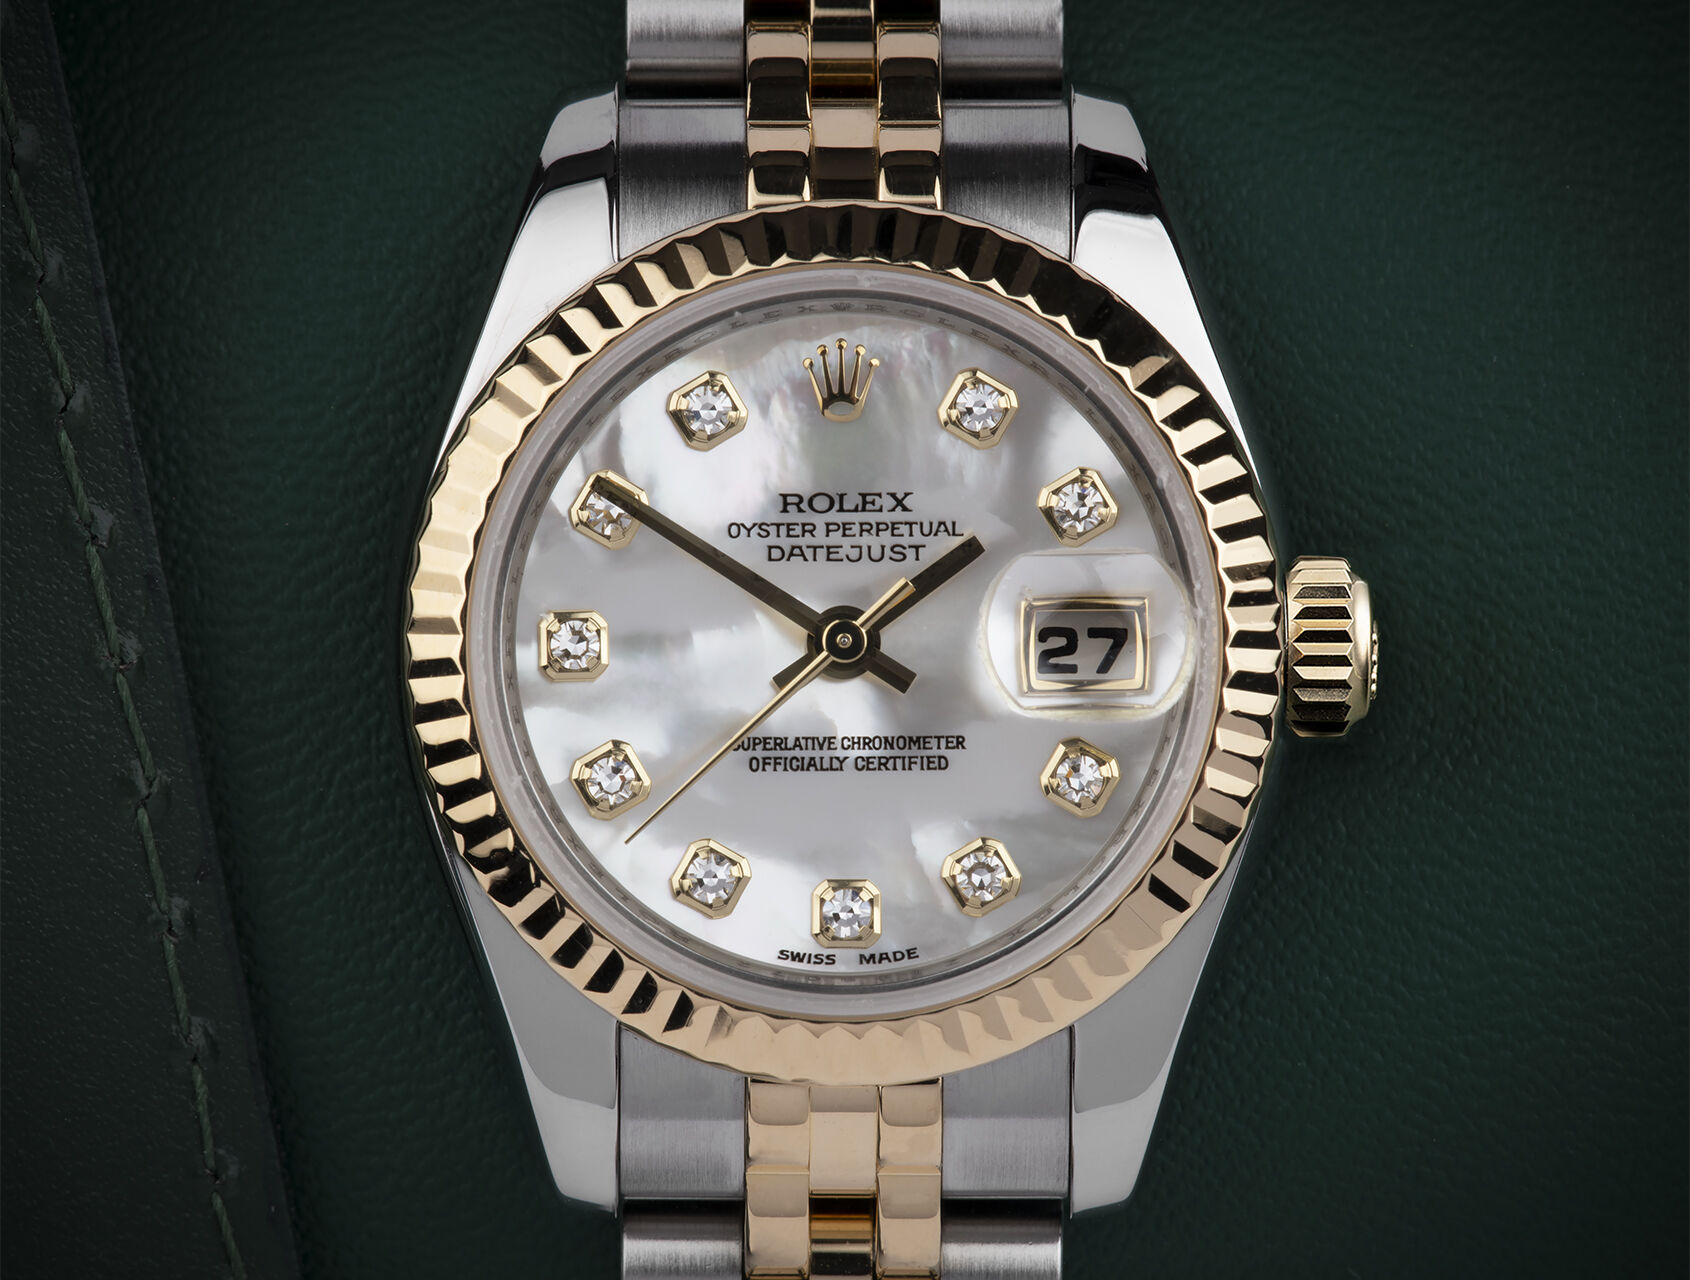 ref 179173 | 179173 - Mother of Pearl | Rolex Datejust